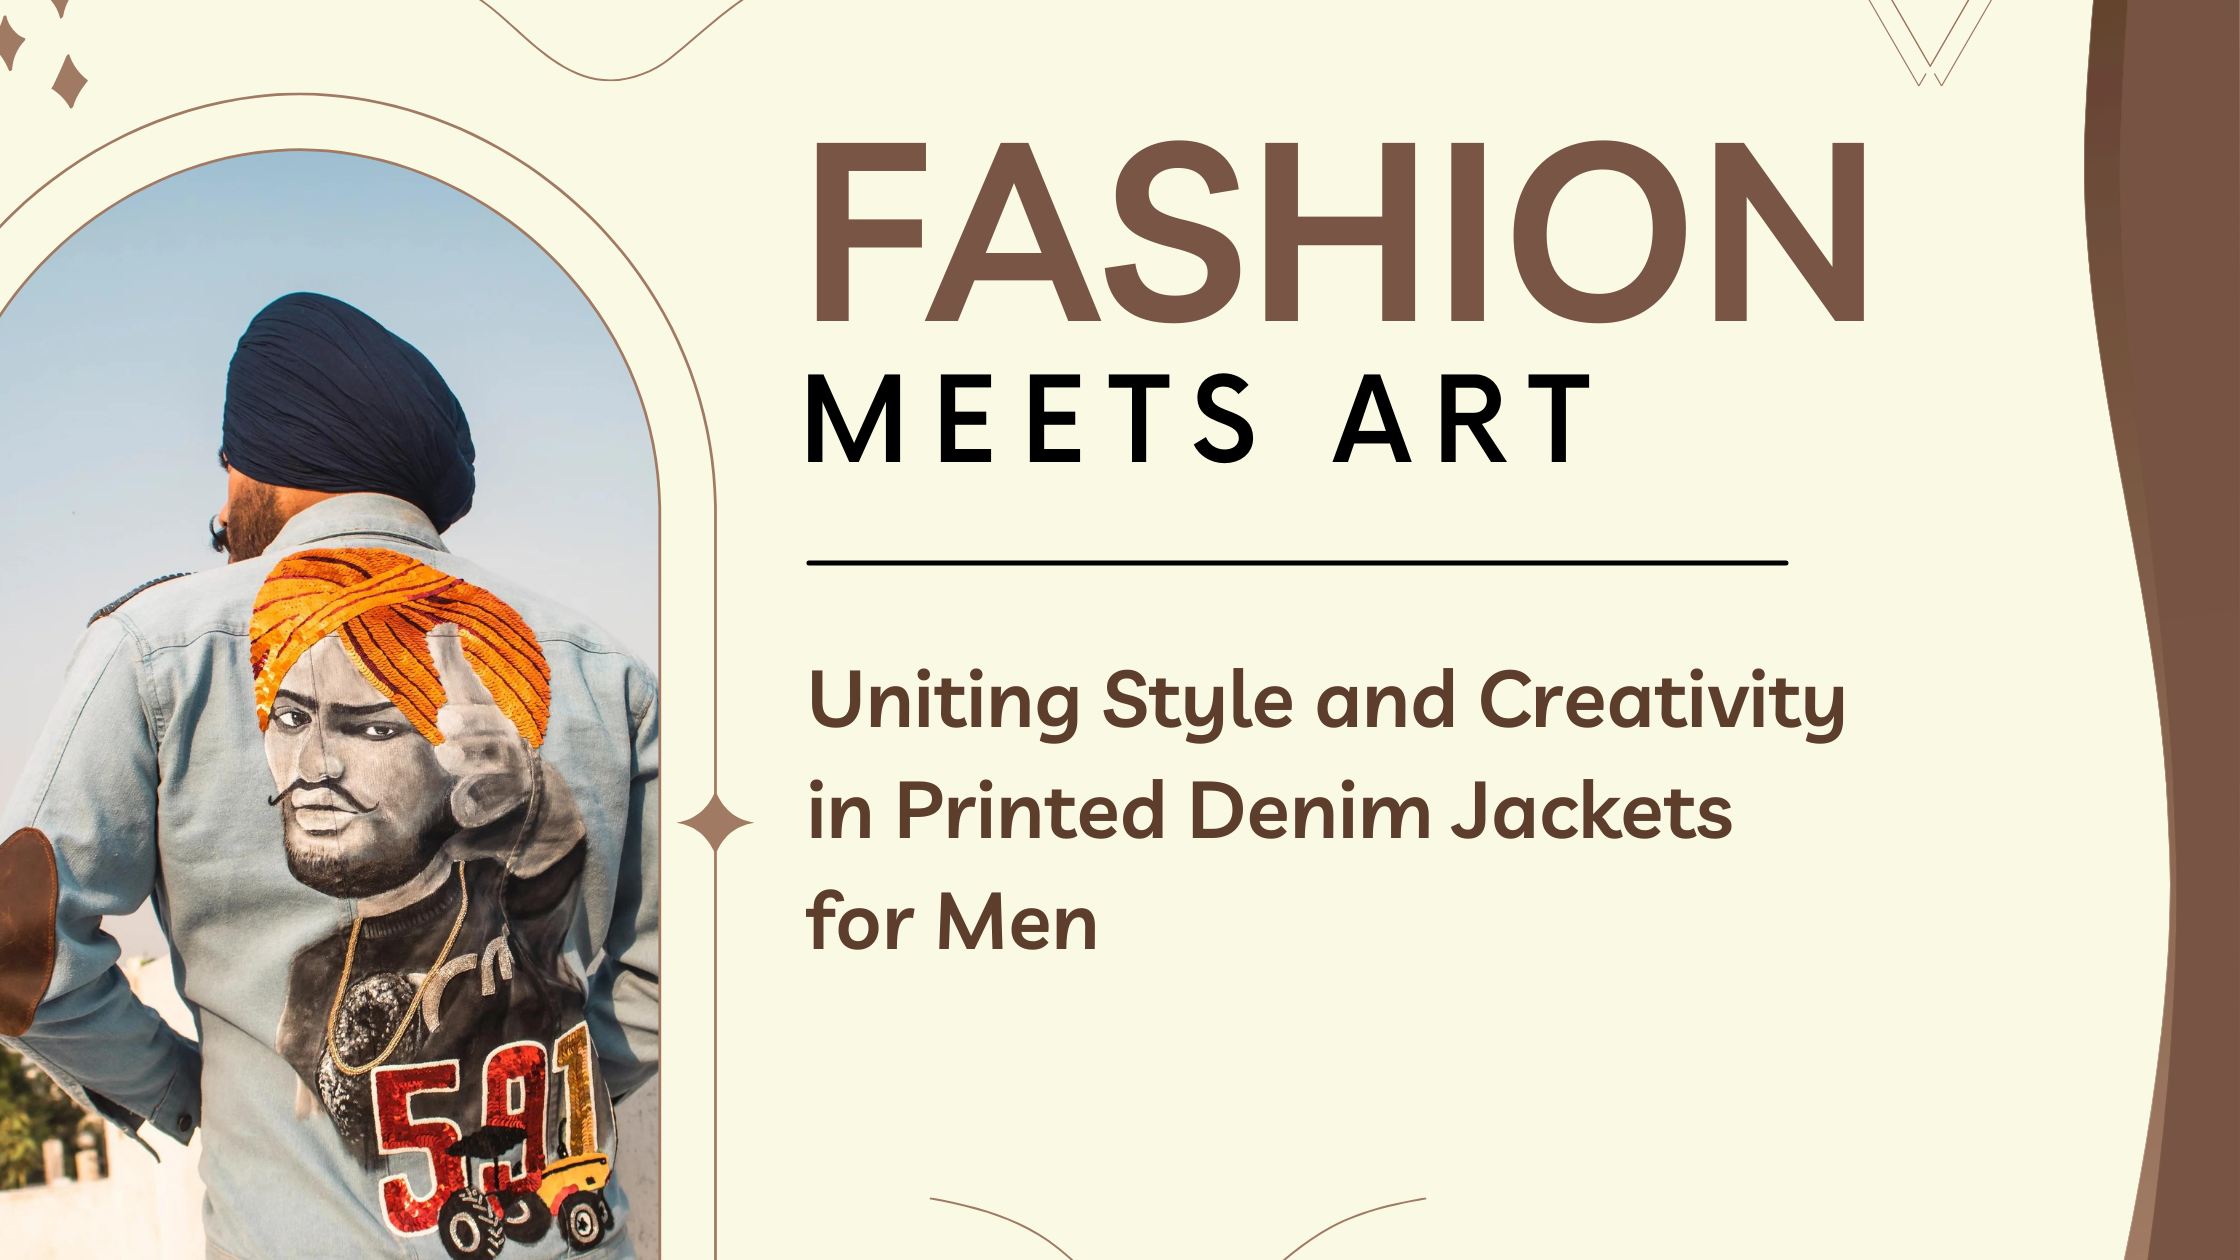 FASHION MEETS ART: UNITING STYLE AND CREATIVITY IN PRINTED DENIM JACKETS FOR MEN